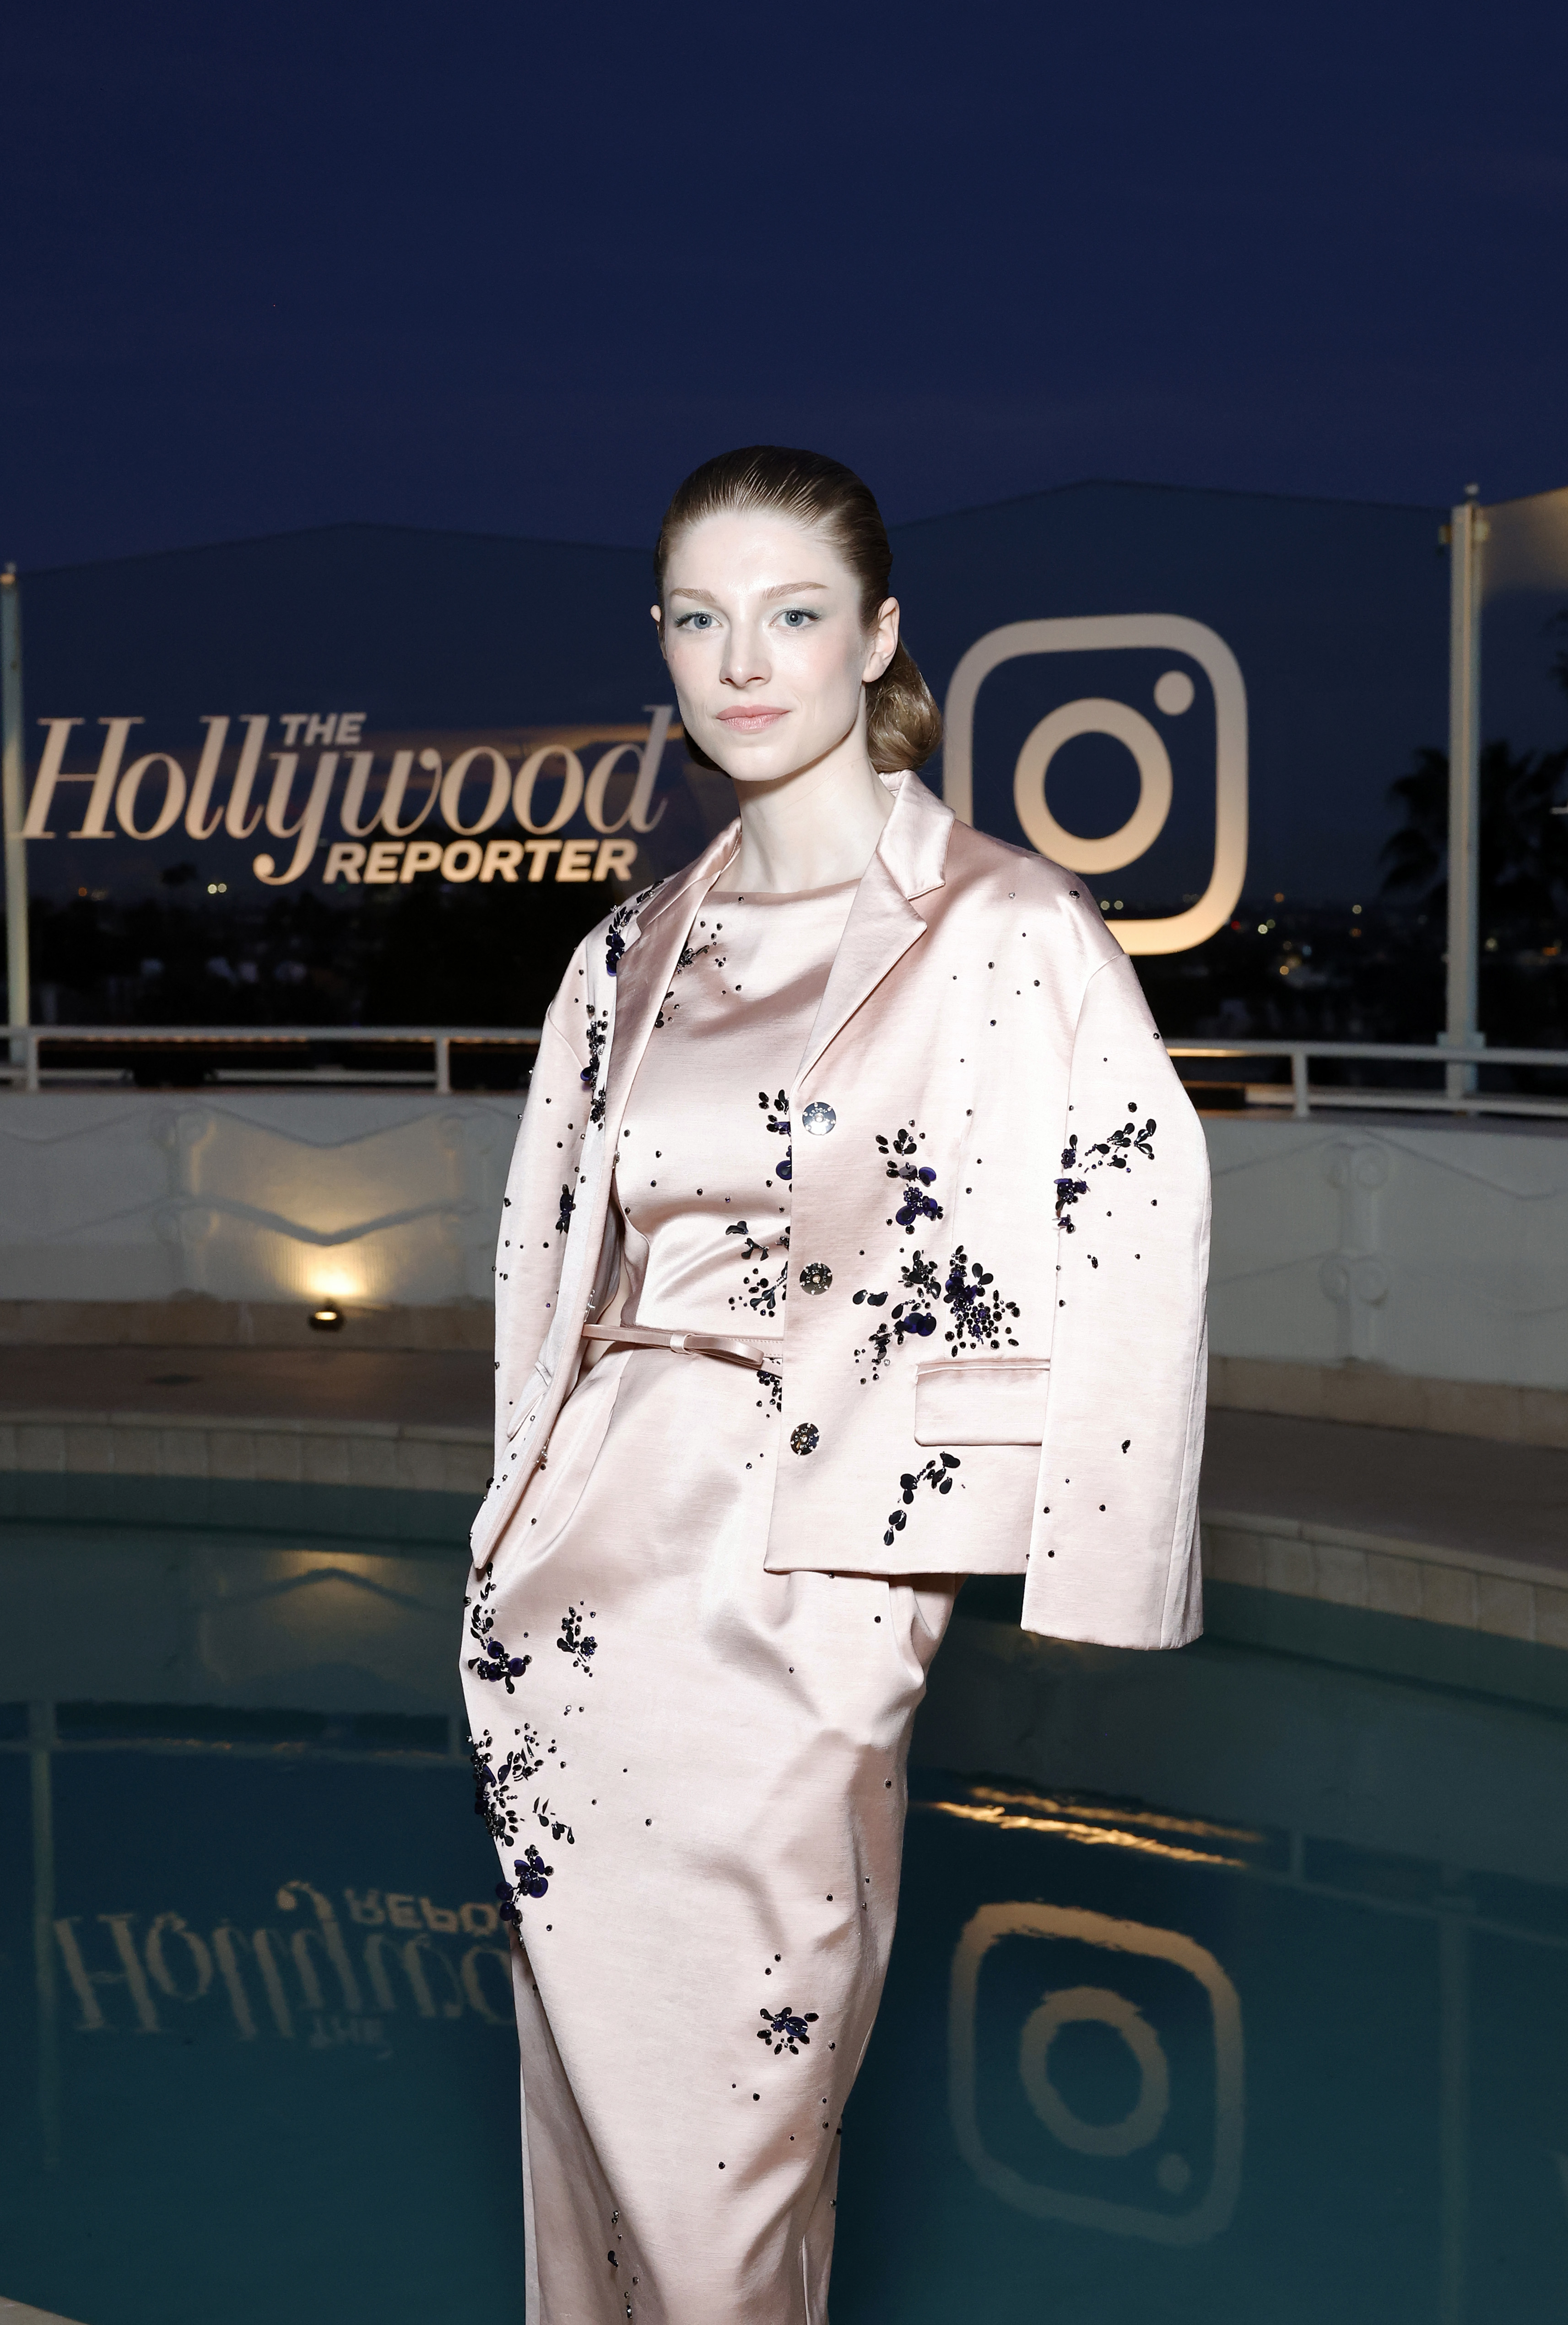 Woman in elegant pink suit with black detailing, posing by a pool at a Hollywood Reporter event